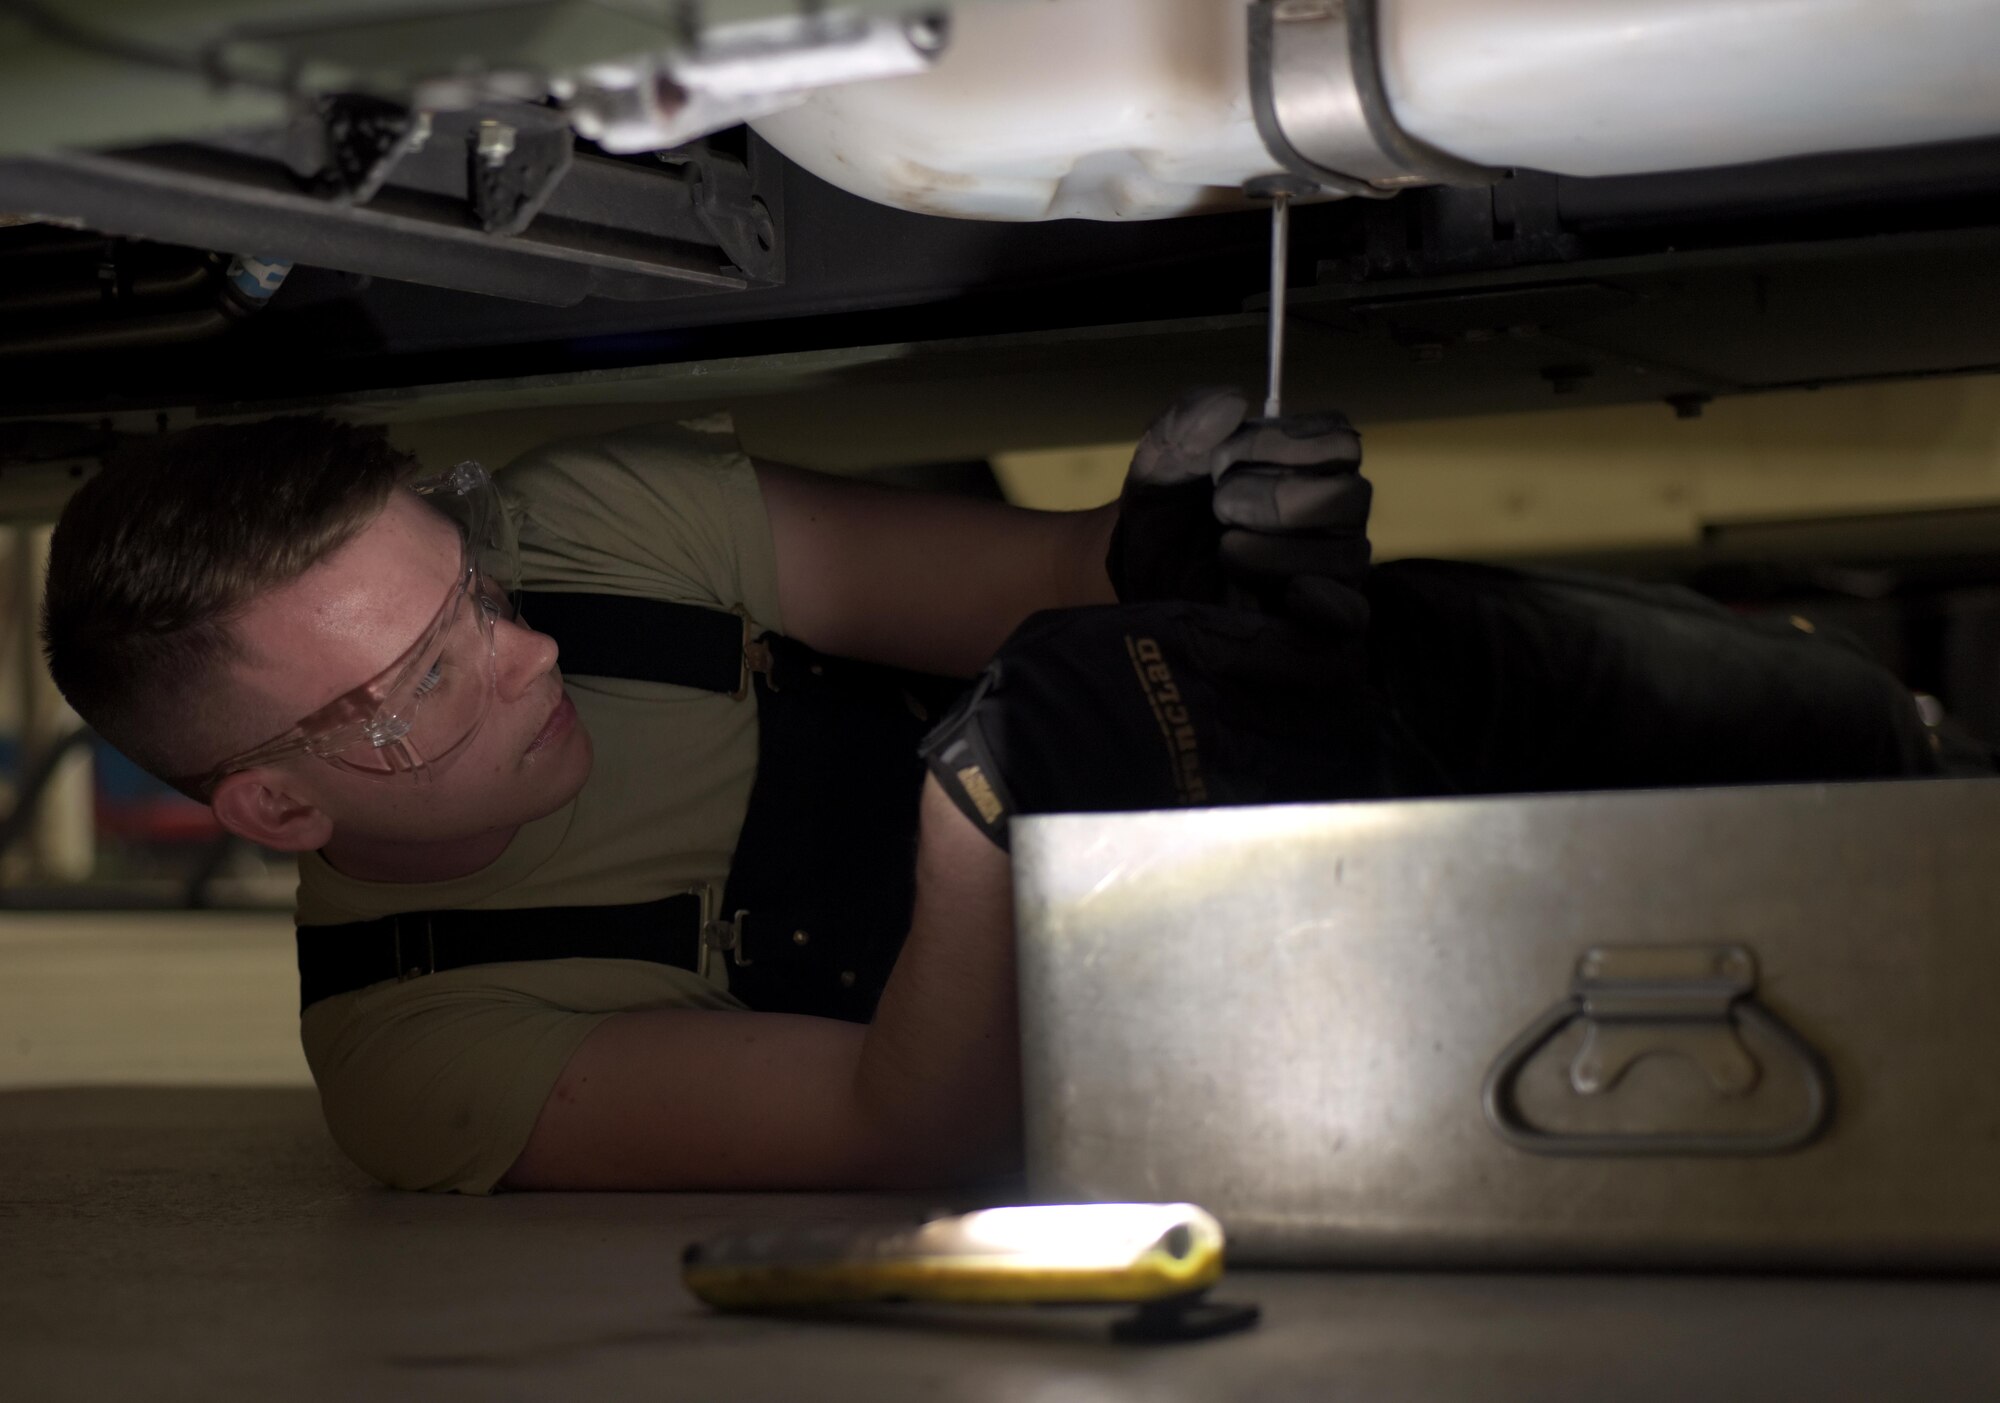 U.S. Air Force Airman 1st Class Joshua Patterson, 100th Logistics Readiness Squadron mission generating vehicular maintenance journeyman, prepares to empty the fuel tank of a Humvee at RAF Mildenhall, England, April 4, 2018. Vehicle maintenance teaches Airmen to develop troubleshooting and critical thinking skills to help them do their job. (U.S. Air Force photo by Airman 1st Class Benjamin Cooper)